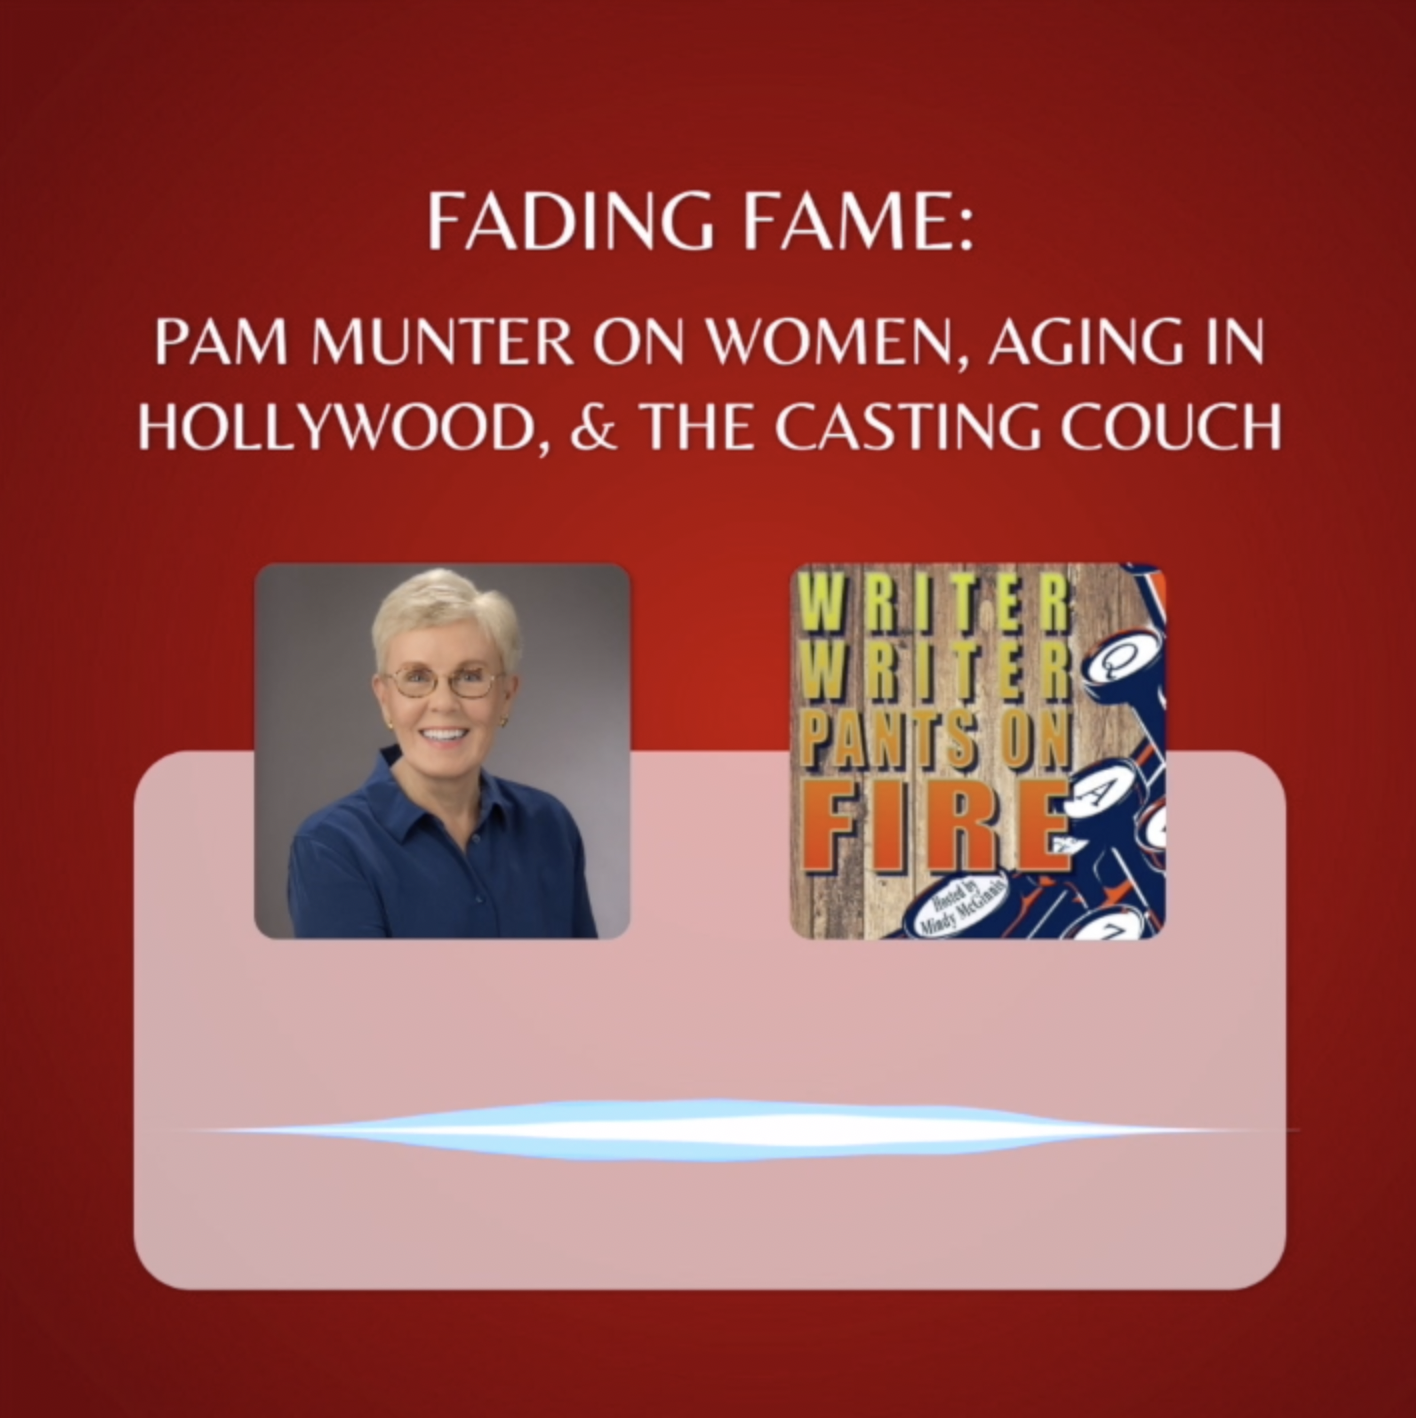 Fading Fame: Pam Munter On Women, Aging In Hollywood, & The Casting Couch